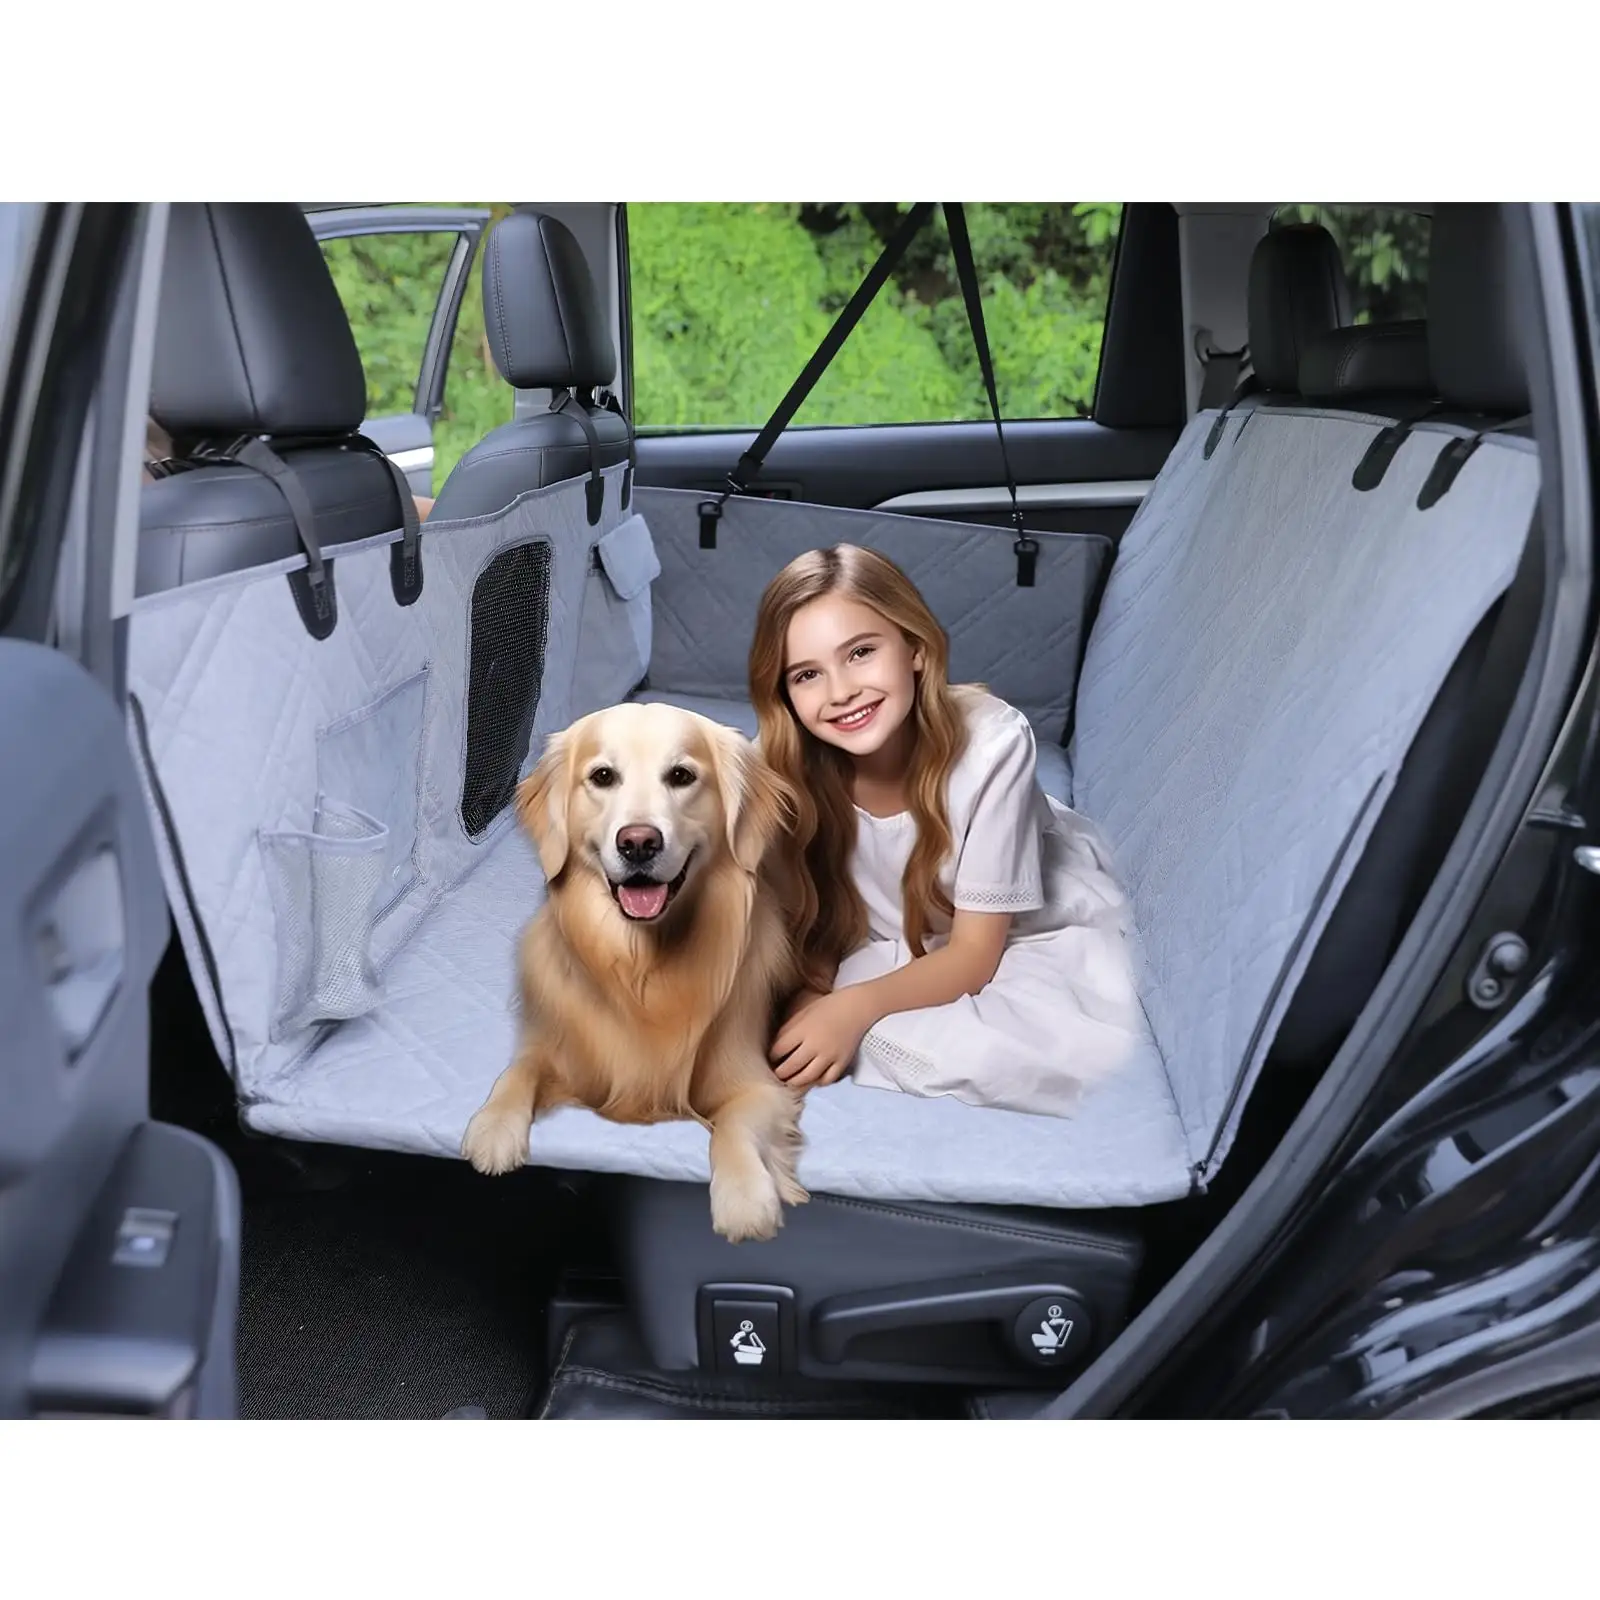 Amazon Hot Sale Low Price Pets Car Seat Cover Dog Back Seat Cover Waterproof Pet Travel Dog Seat Cover With Strong Hard Bottom